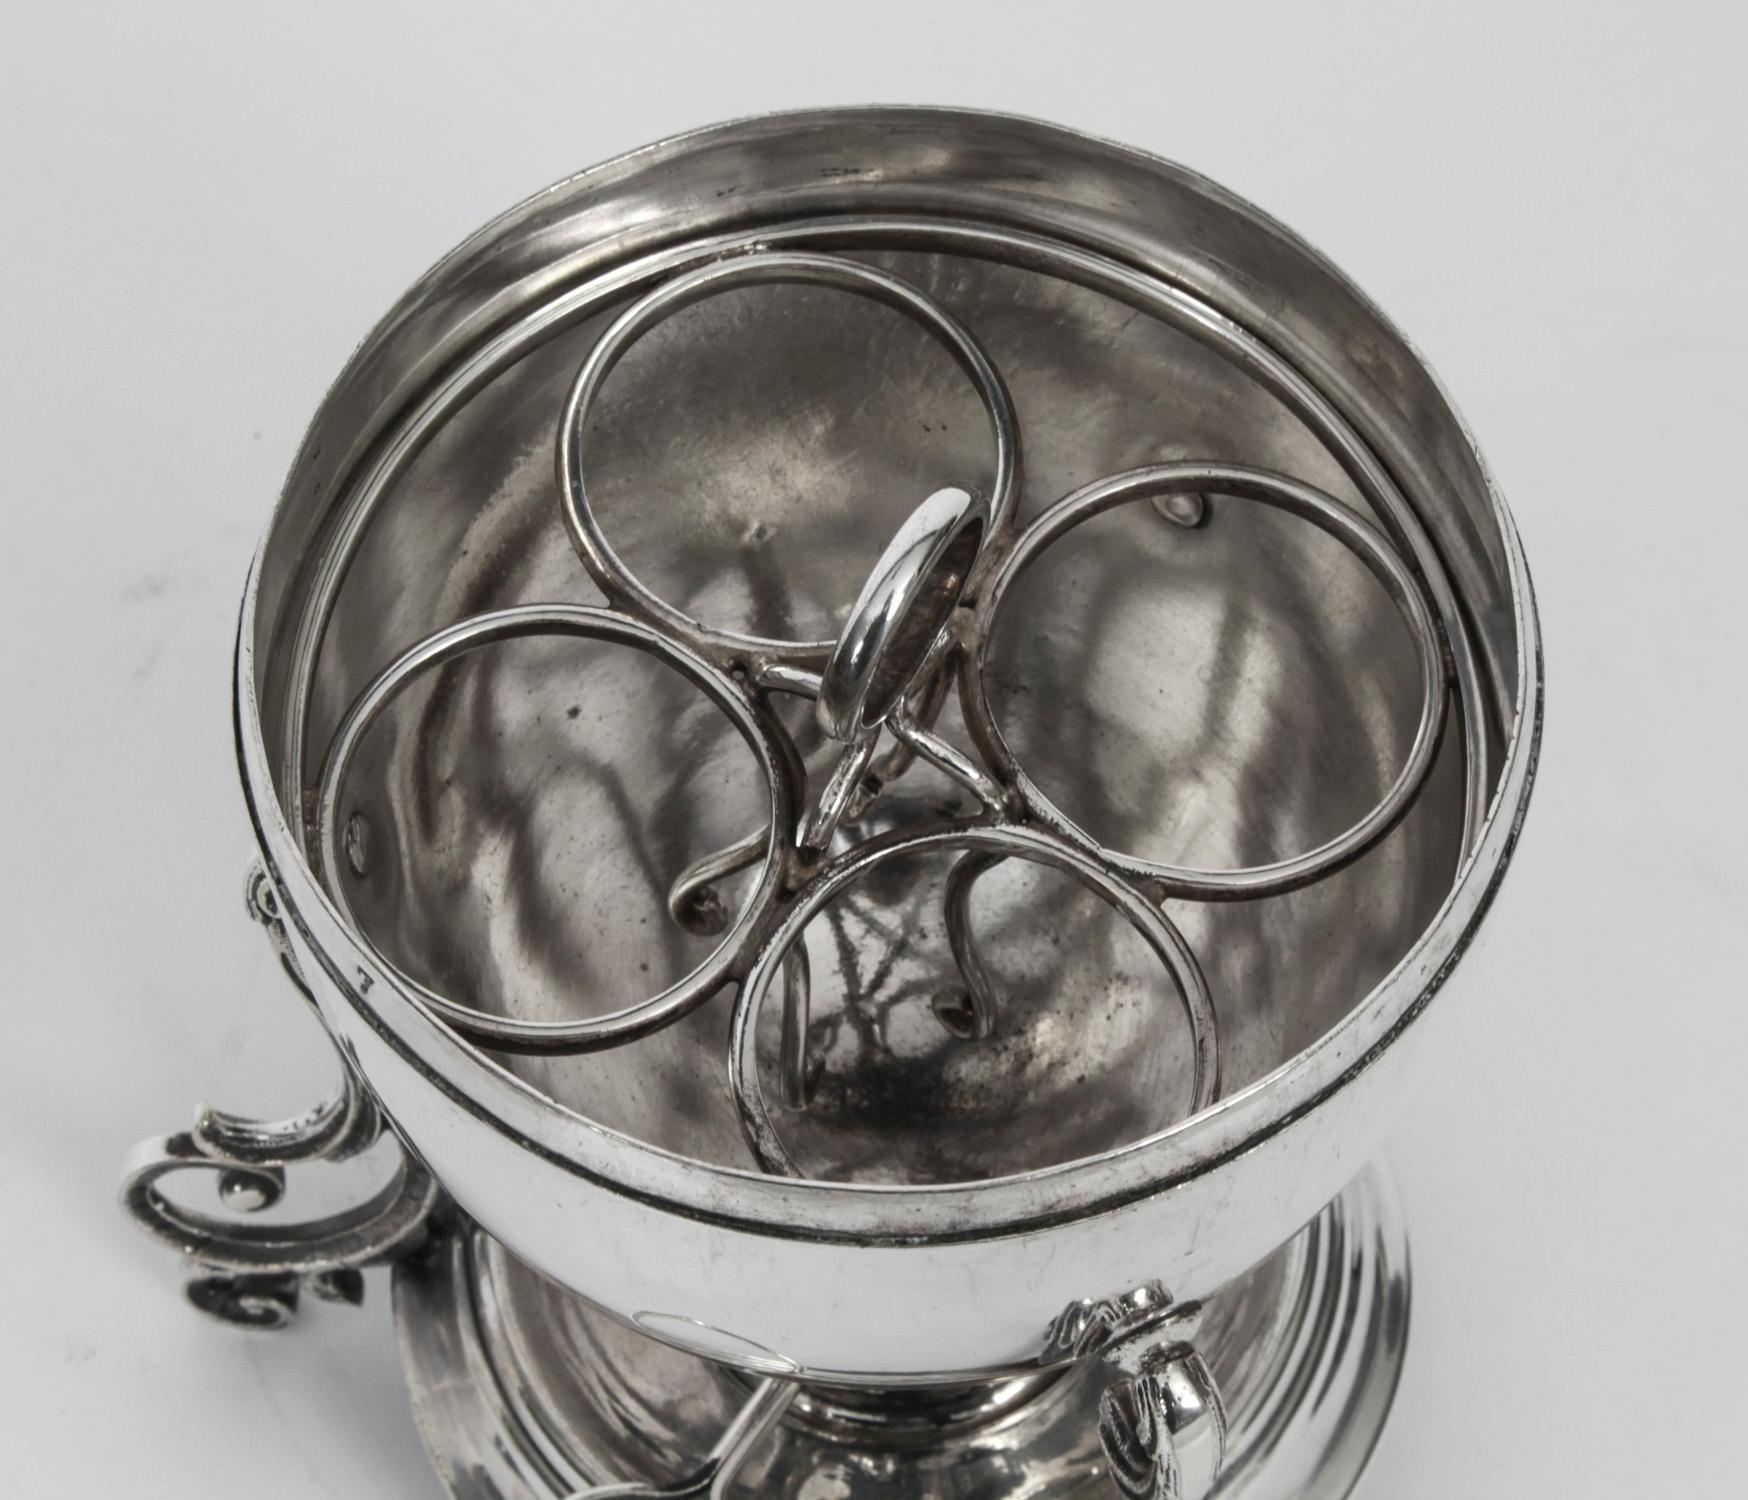 Antique Victorian Silver Plated Egg Coddler / Boiler, 19th Century 1